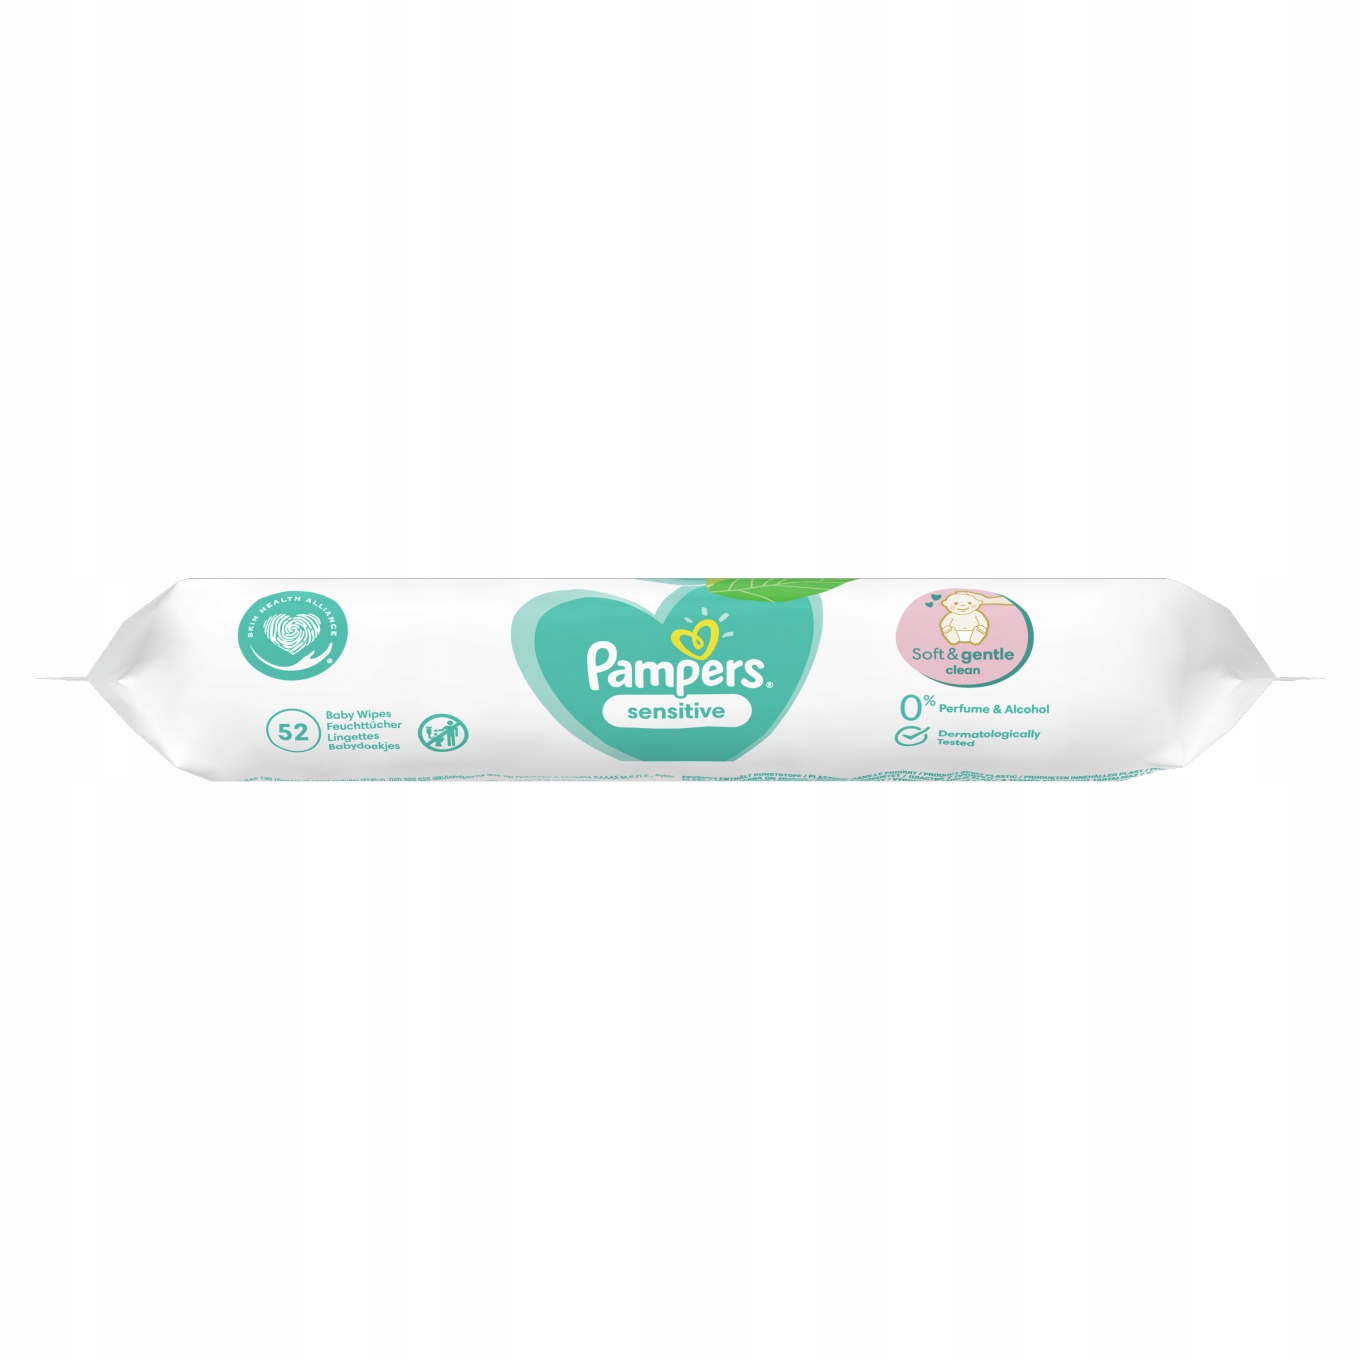 pampers aqua pure wipes review